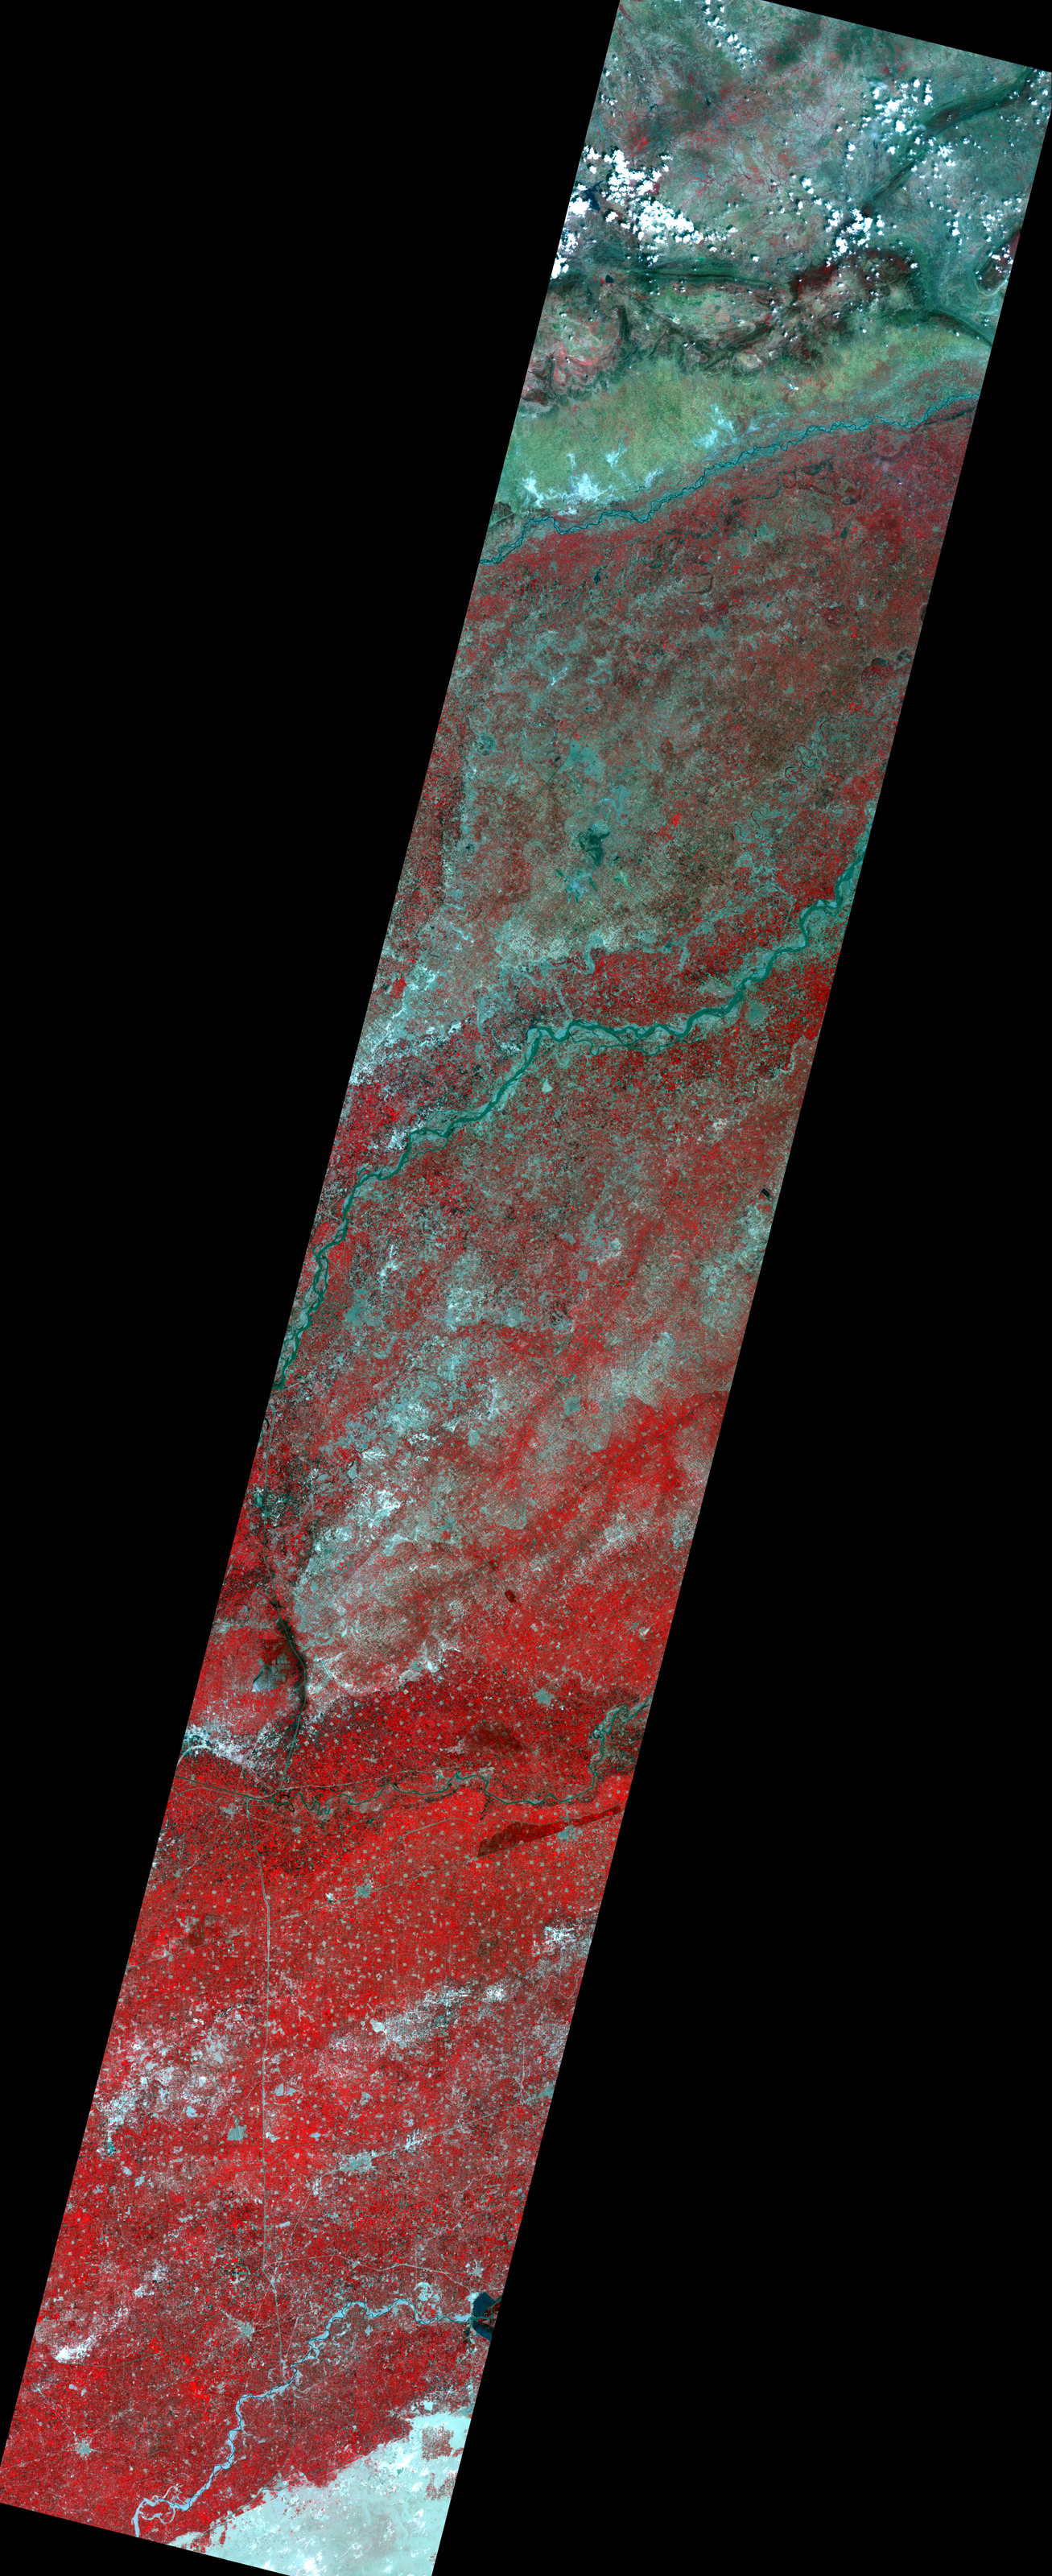 Fig.1(right, False color): AVNIR-2 images with 0.0 degree pointing angle acquired at 14:53 on September 30, 2010 (JST).